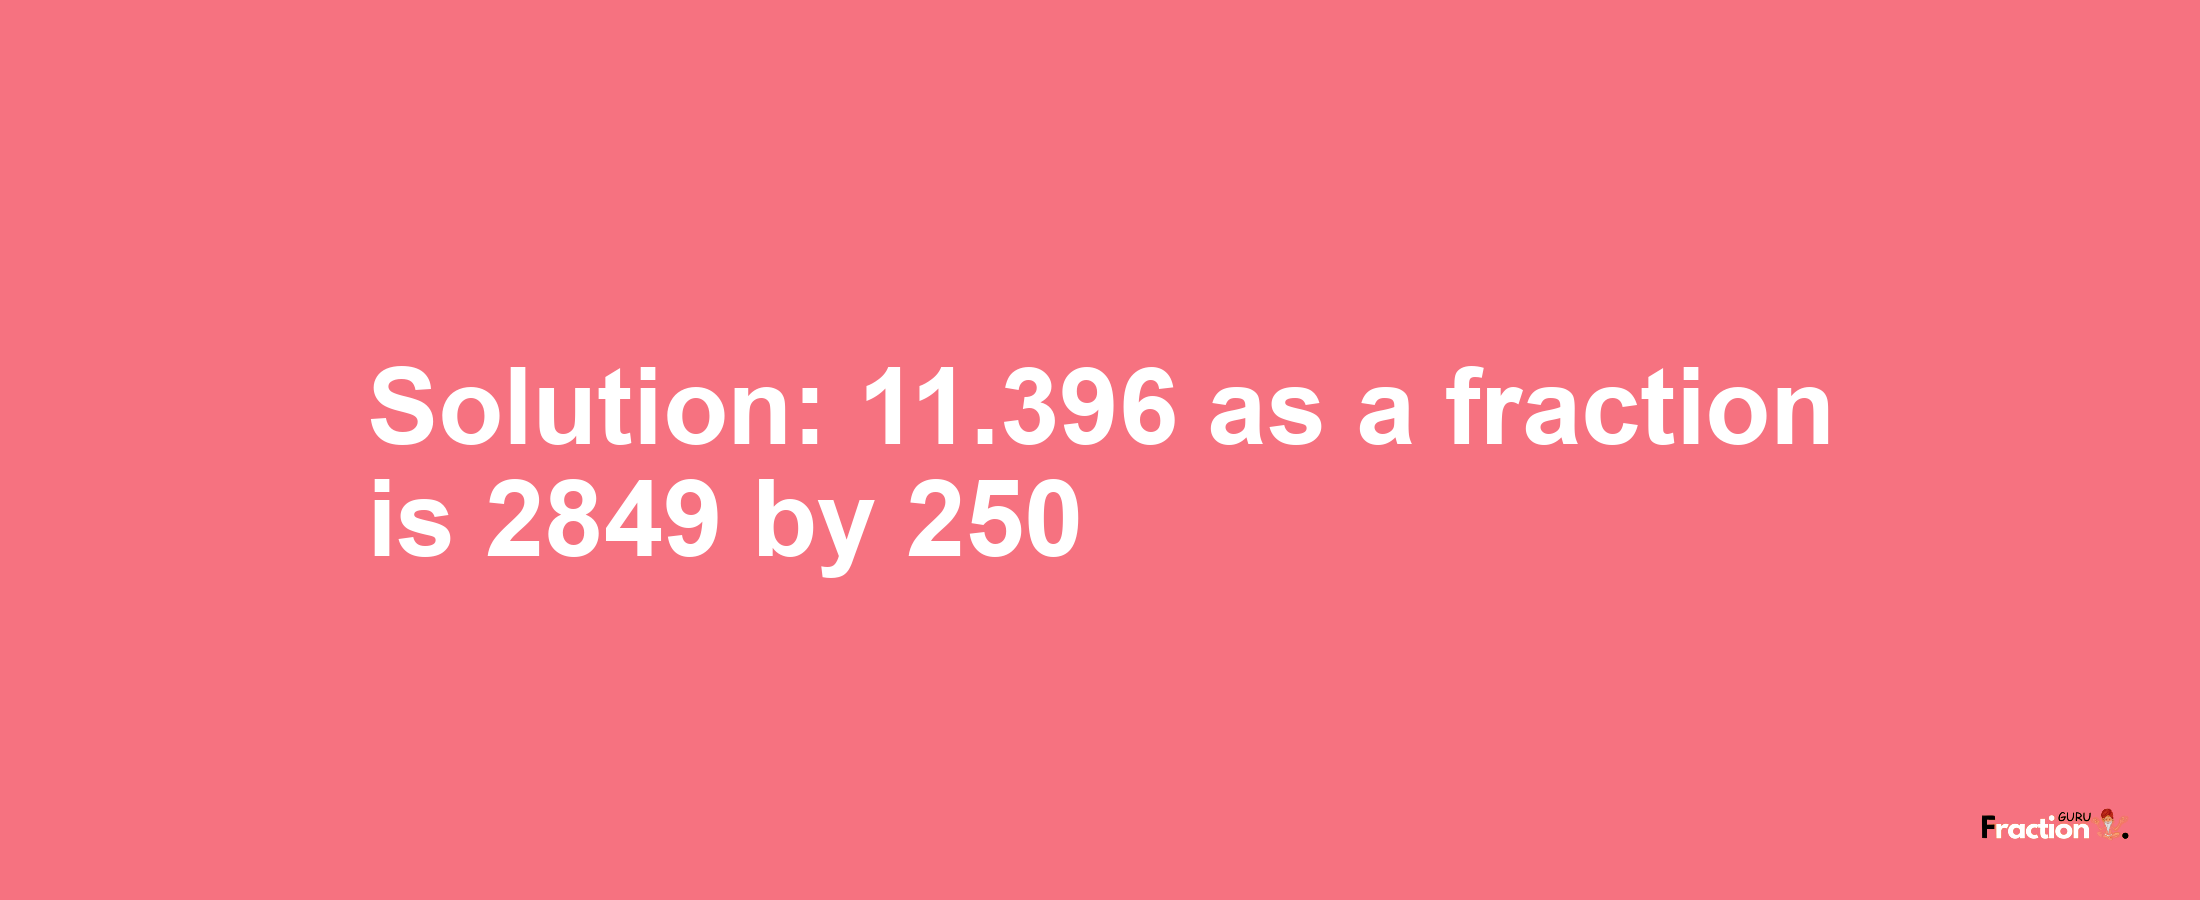 Solution:11.396 as a fraction is 2849/250